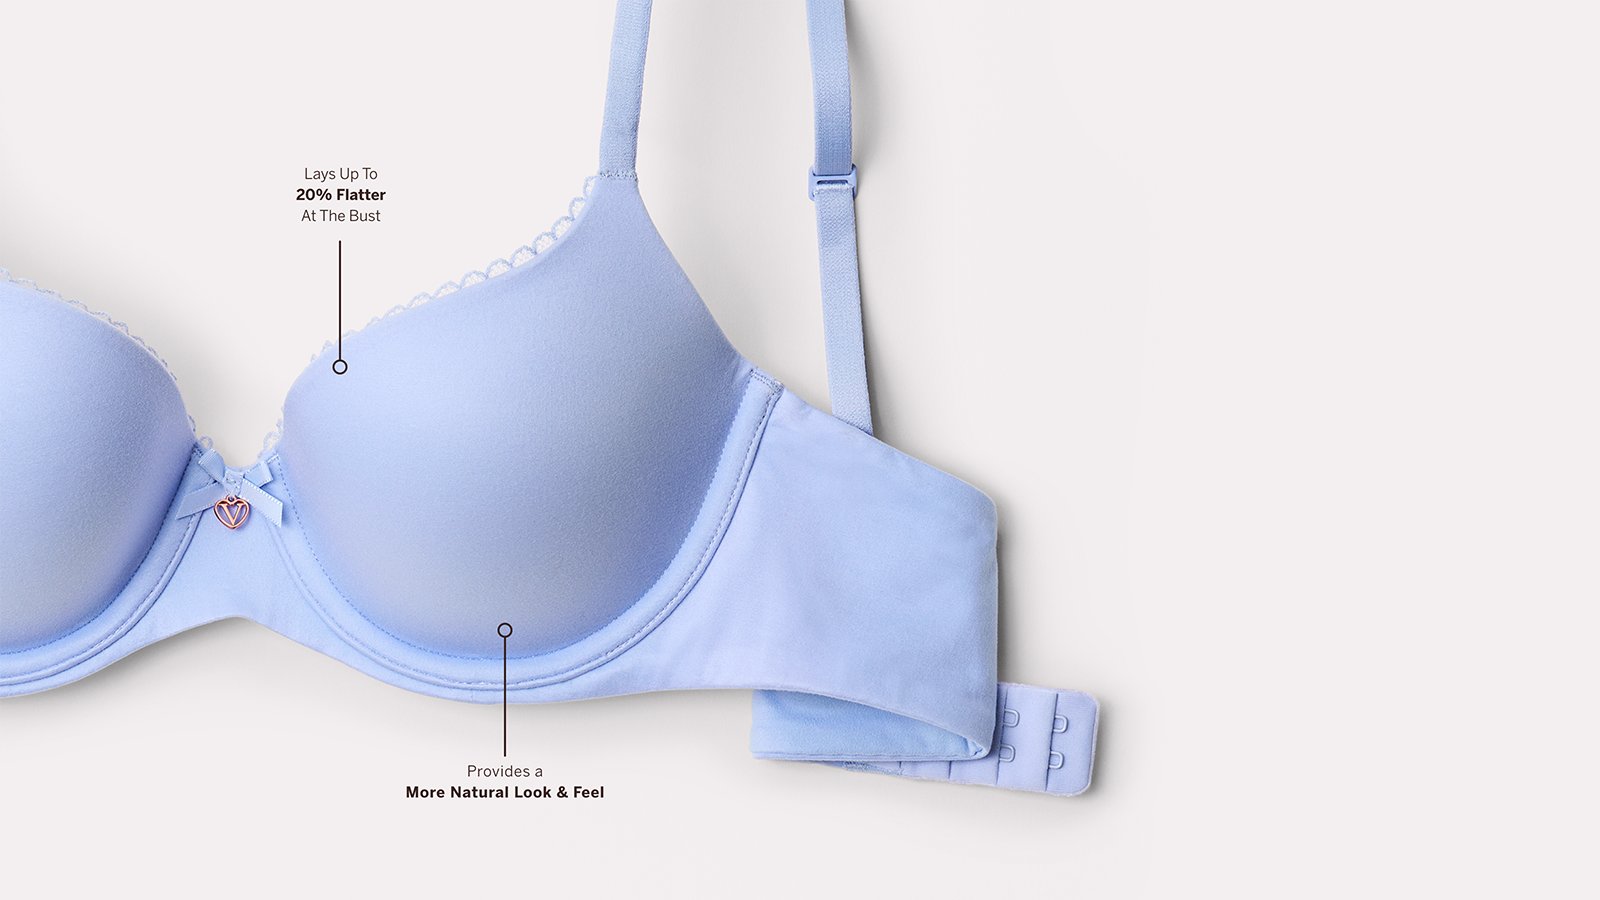 The New Infinity Edge.&#160;Your favorite lightly lined styles are better than ever. Featuring our #1 Bra: The Body by Victoria Lightly Lined Full Coverage. Click to shop lightly lined bras.